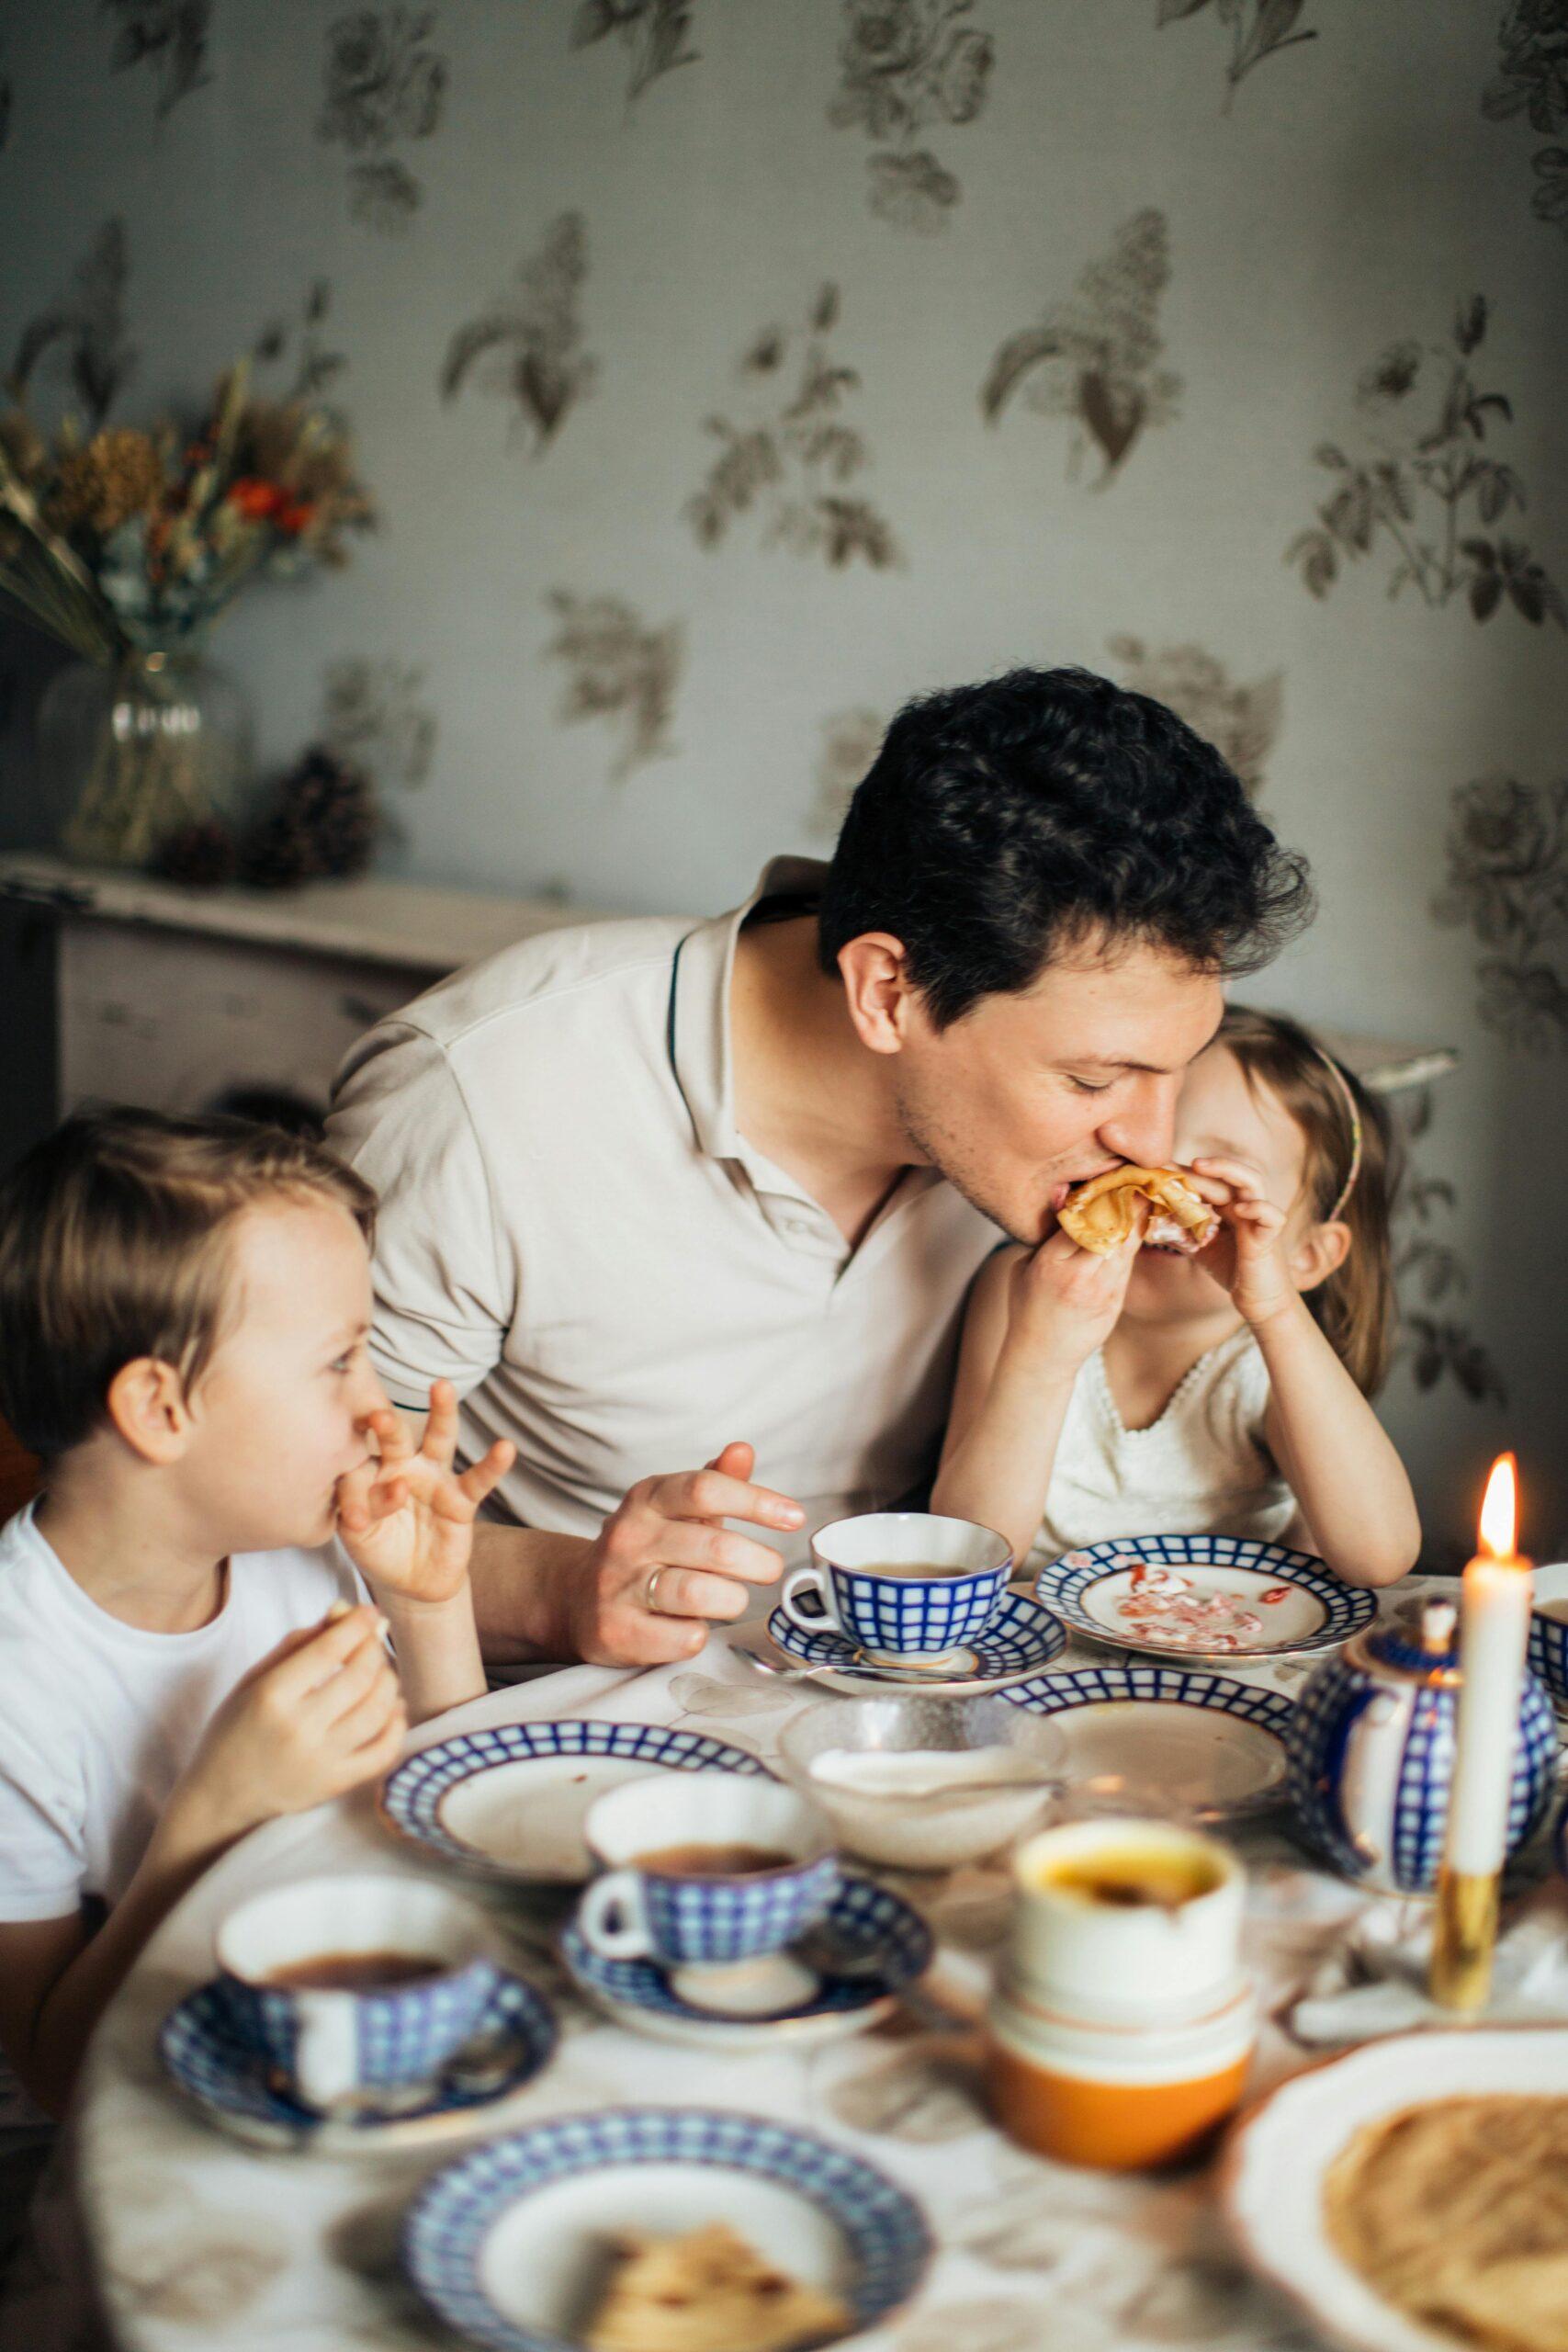 man eating with two children at a table full of food